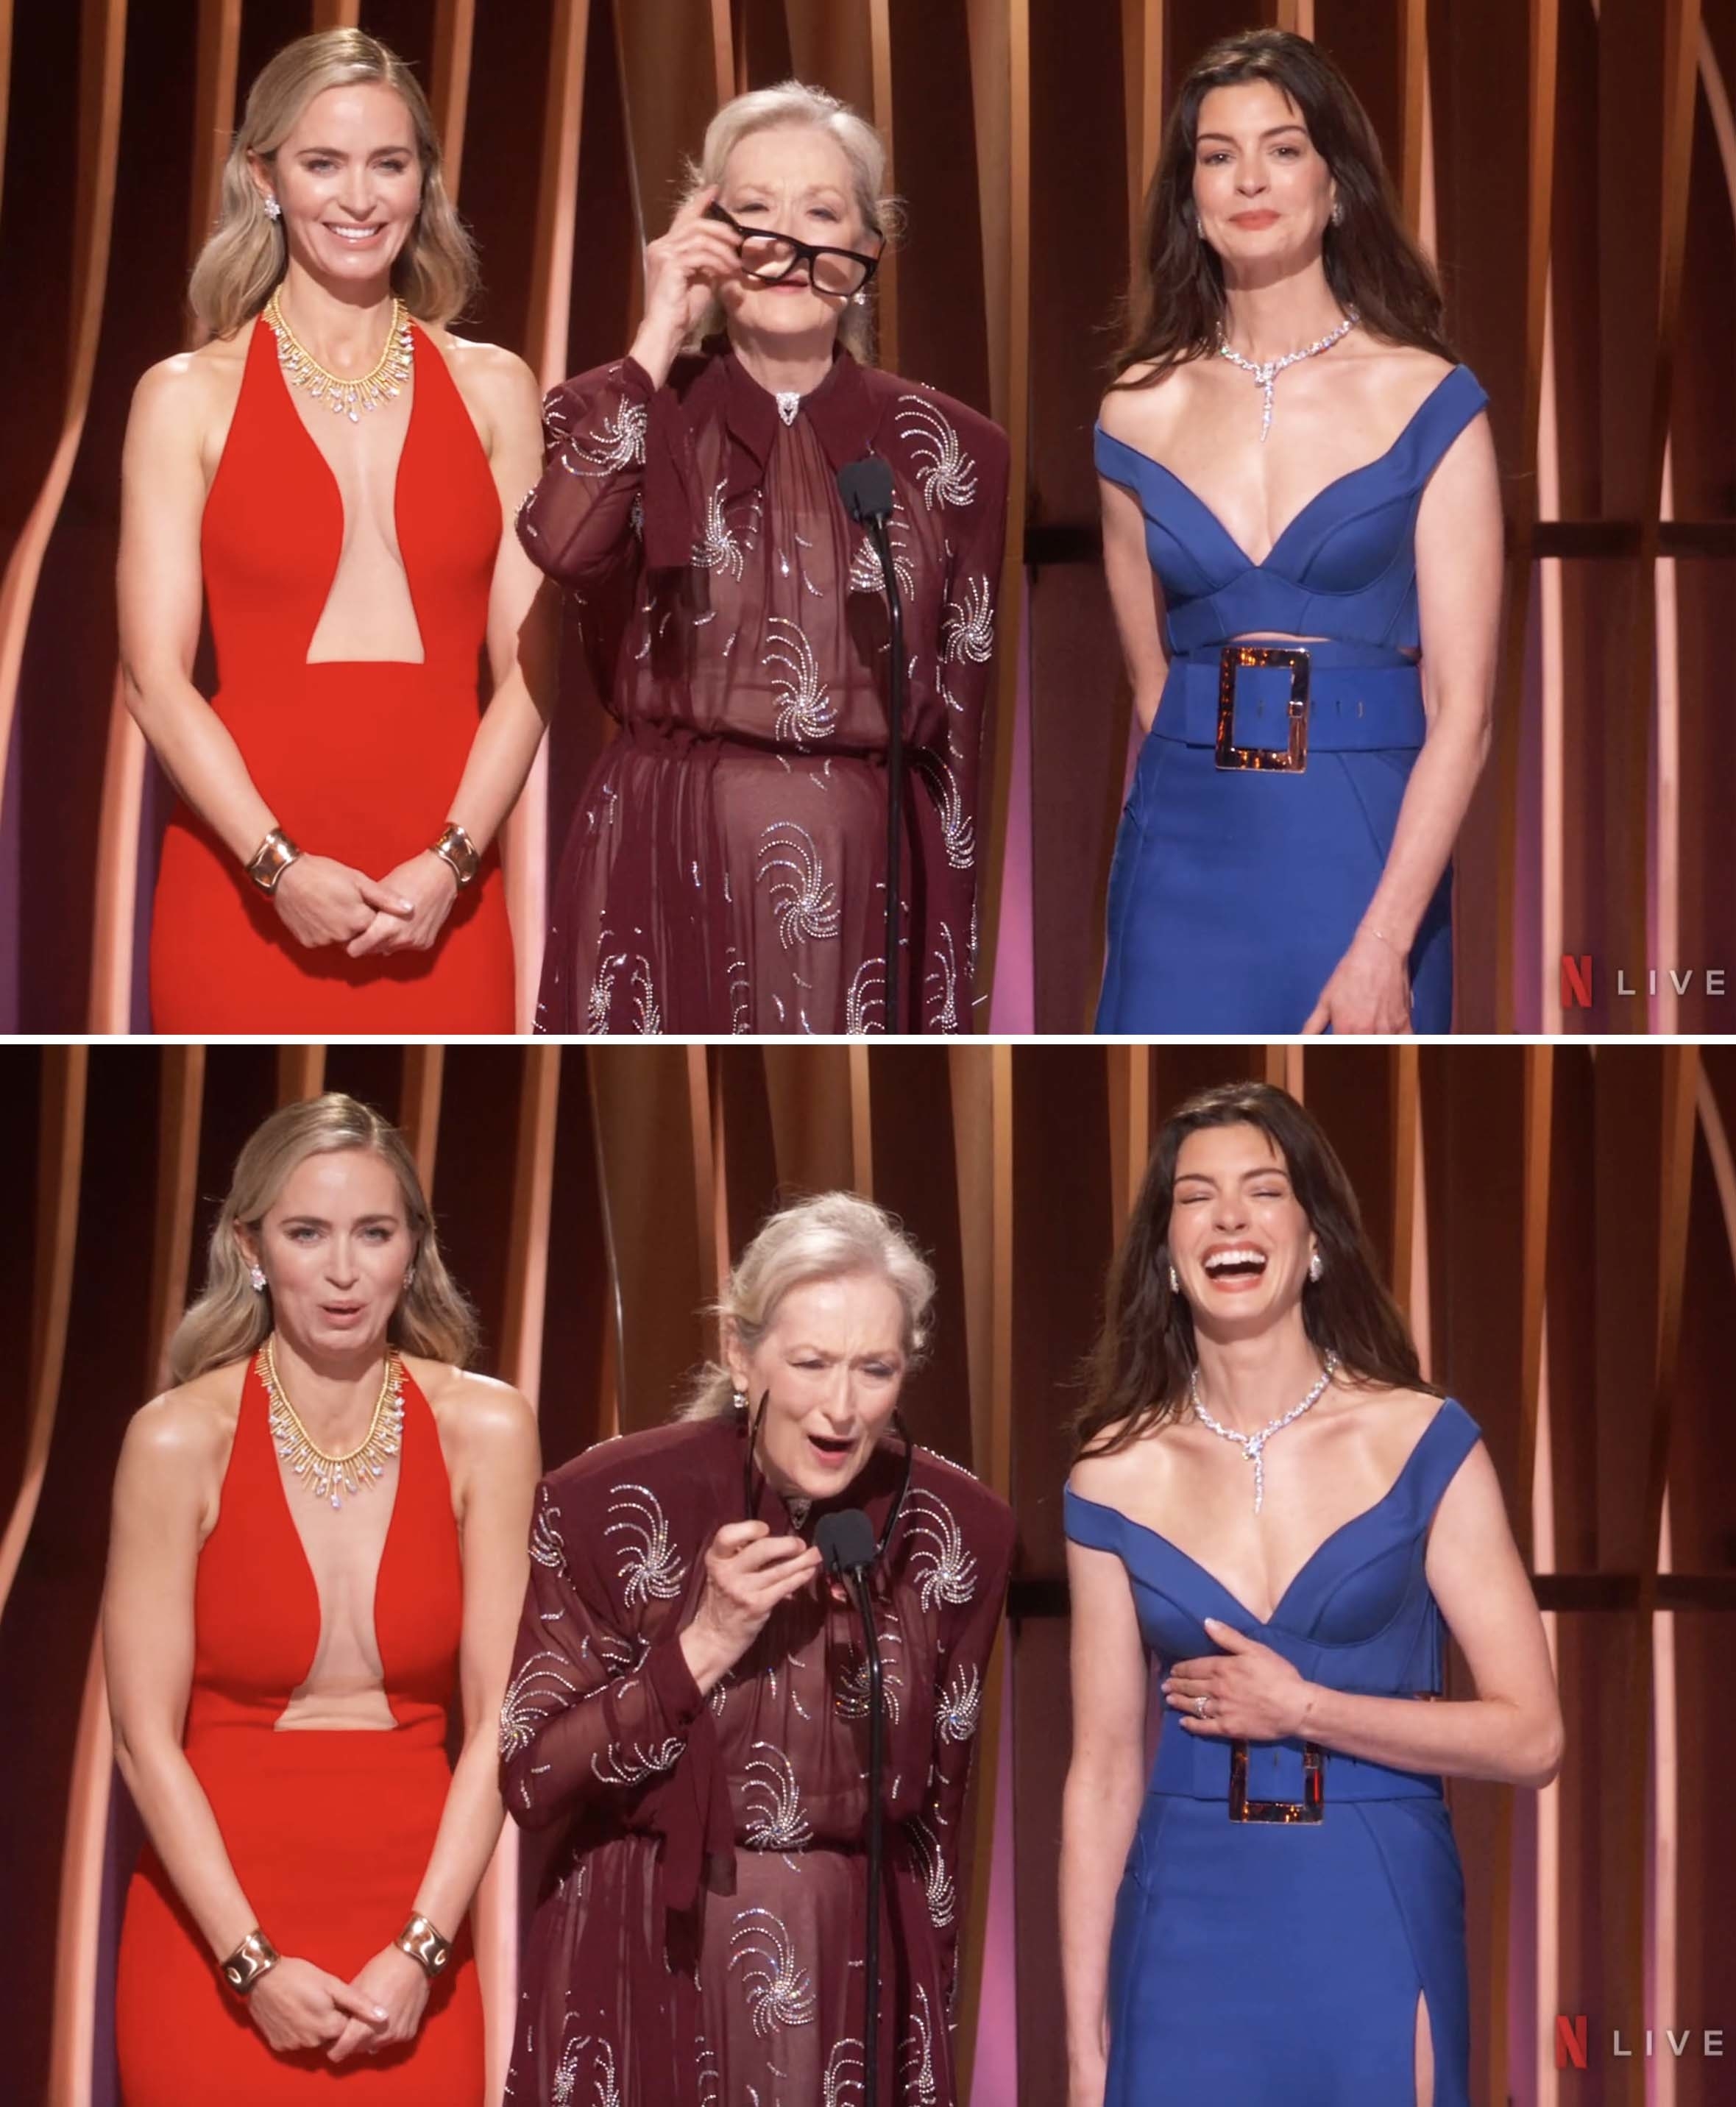 the two ladies laughing as meryl stands in the middle fidgeting with her glasses